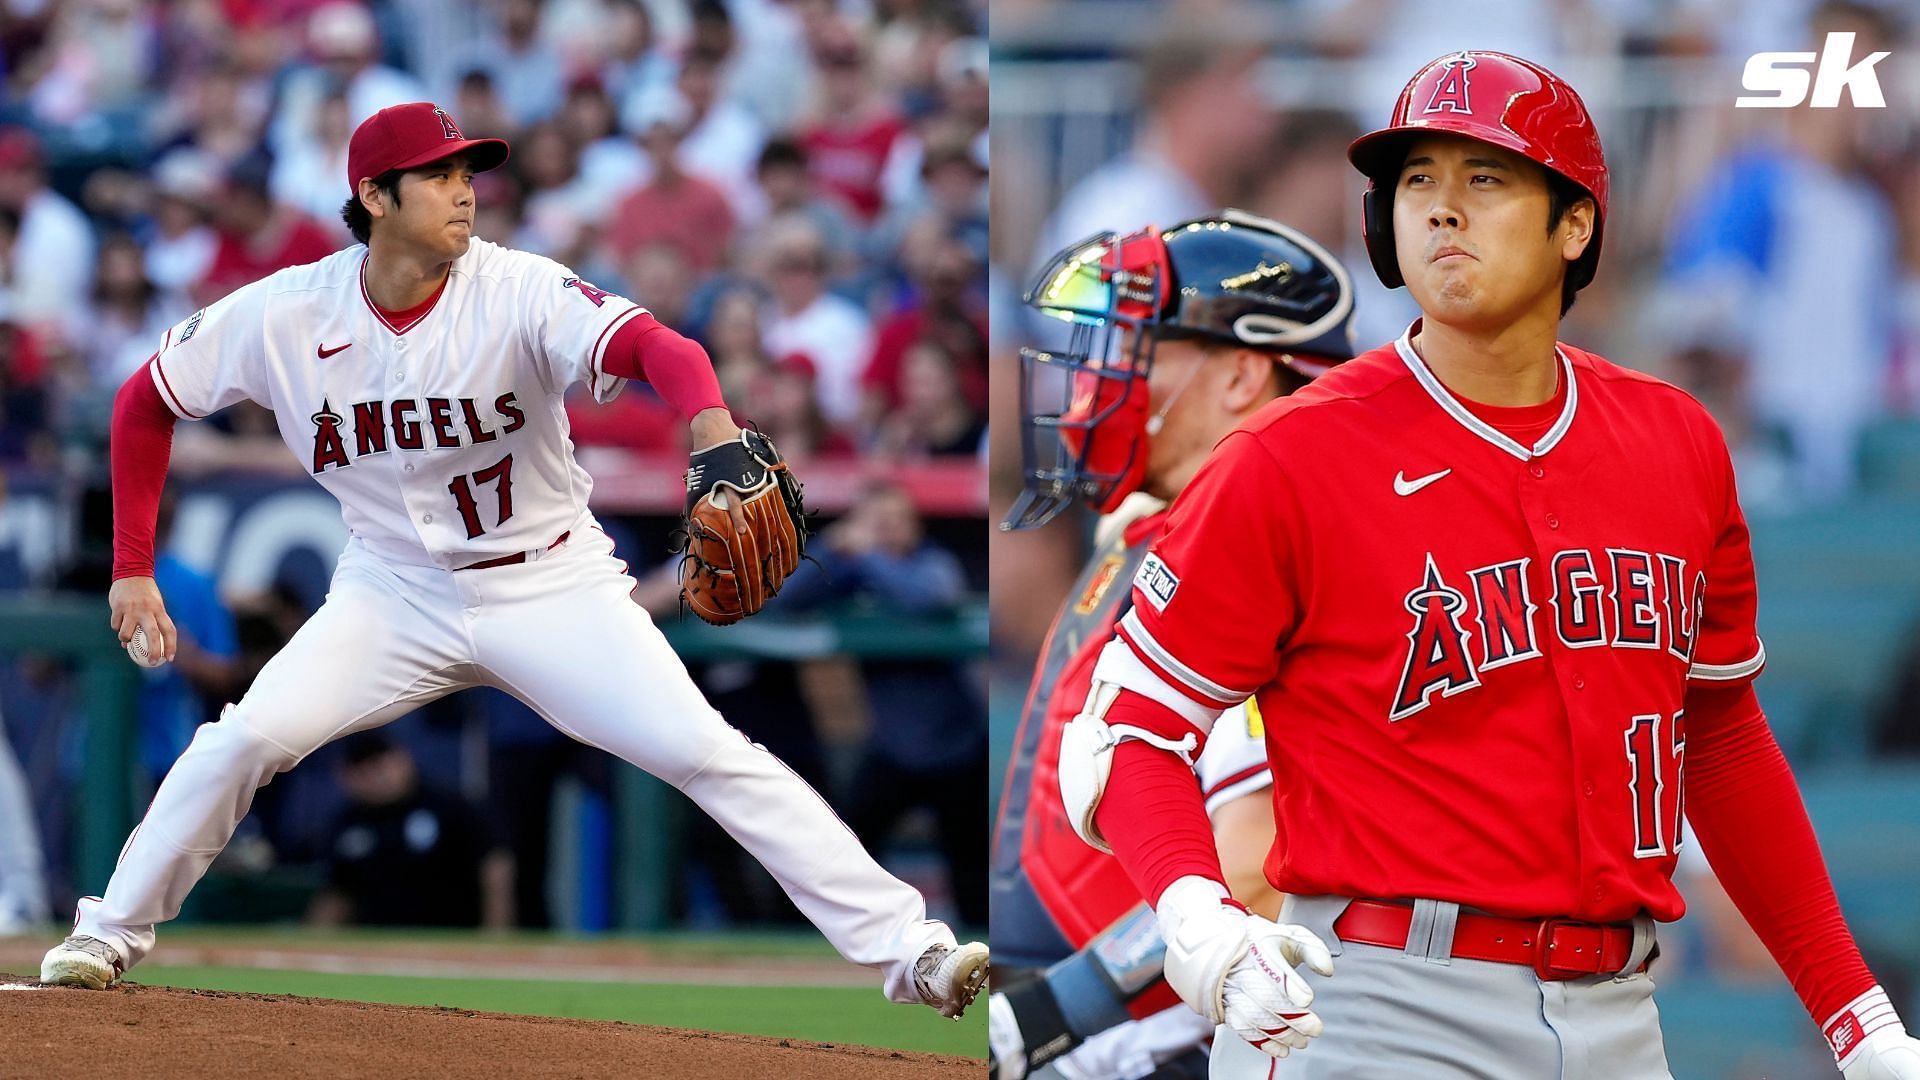 Shohei Ohtani will not be traded, but let's find a comp anyway